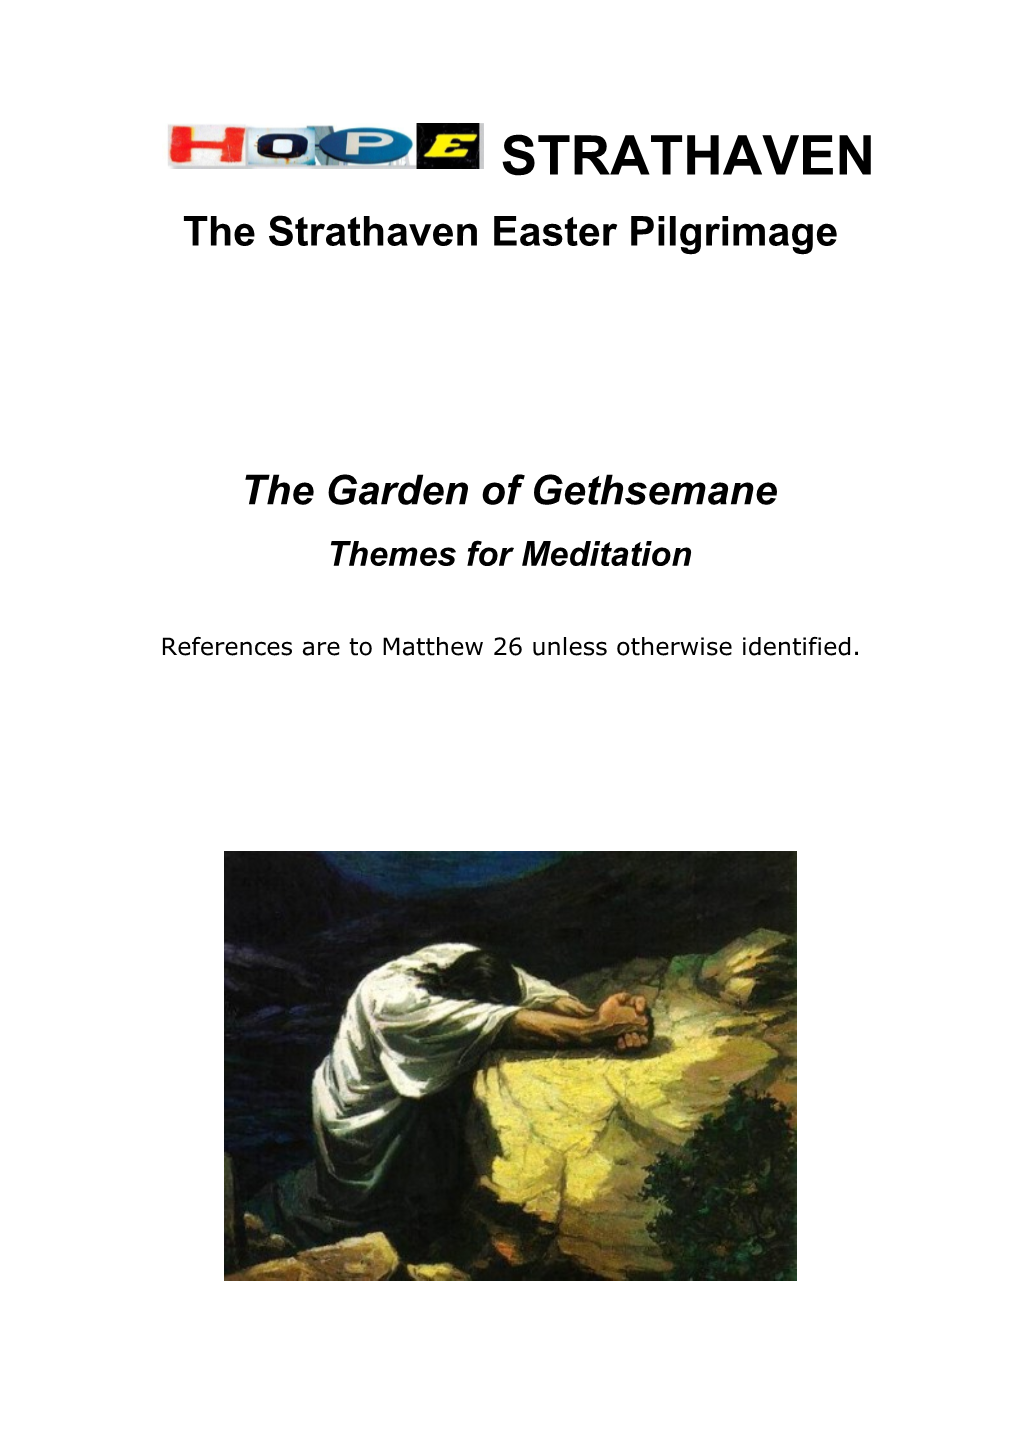 Themes for Meditation for the Garden of Gethsemane